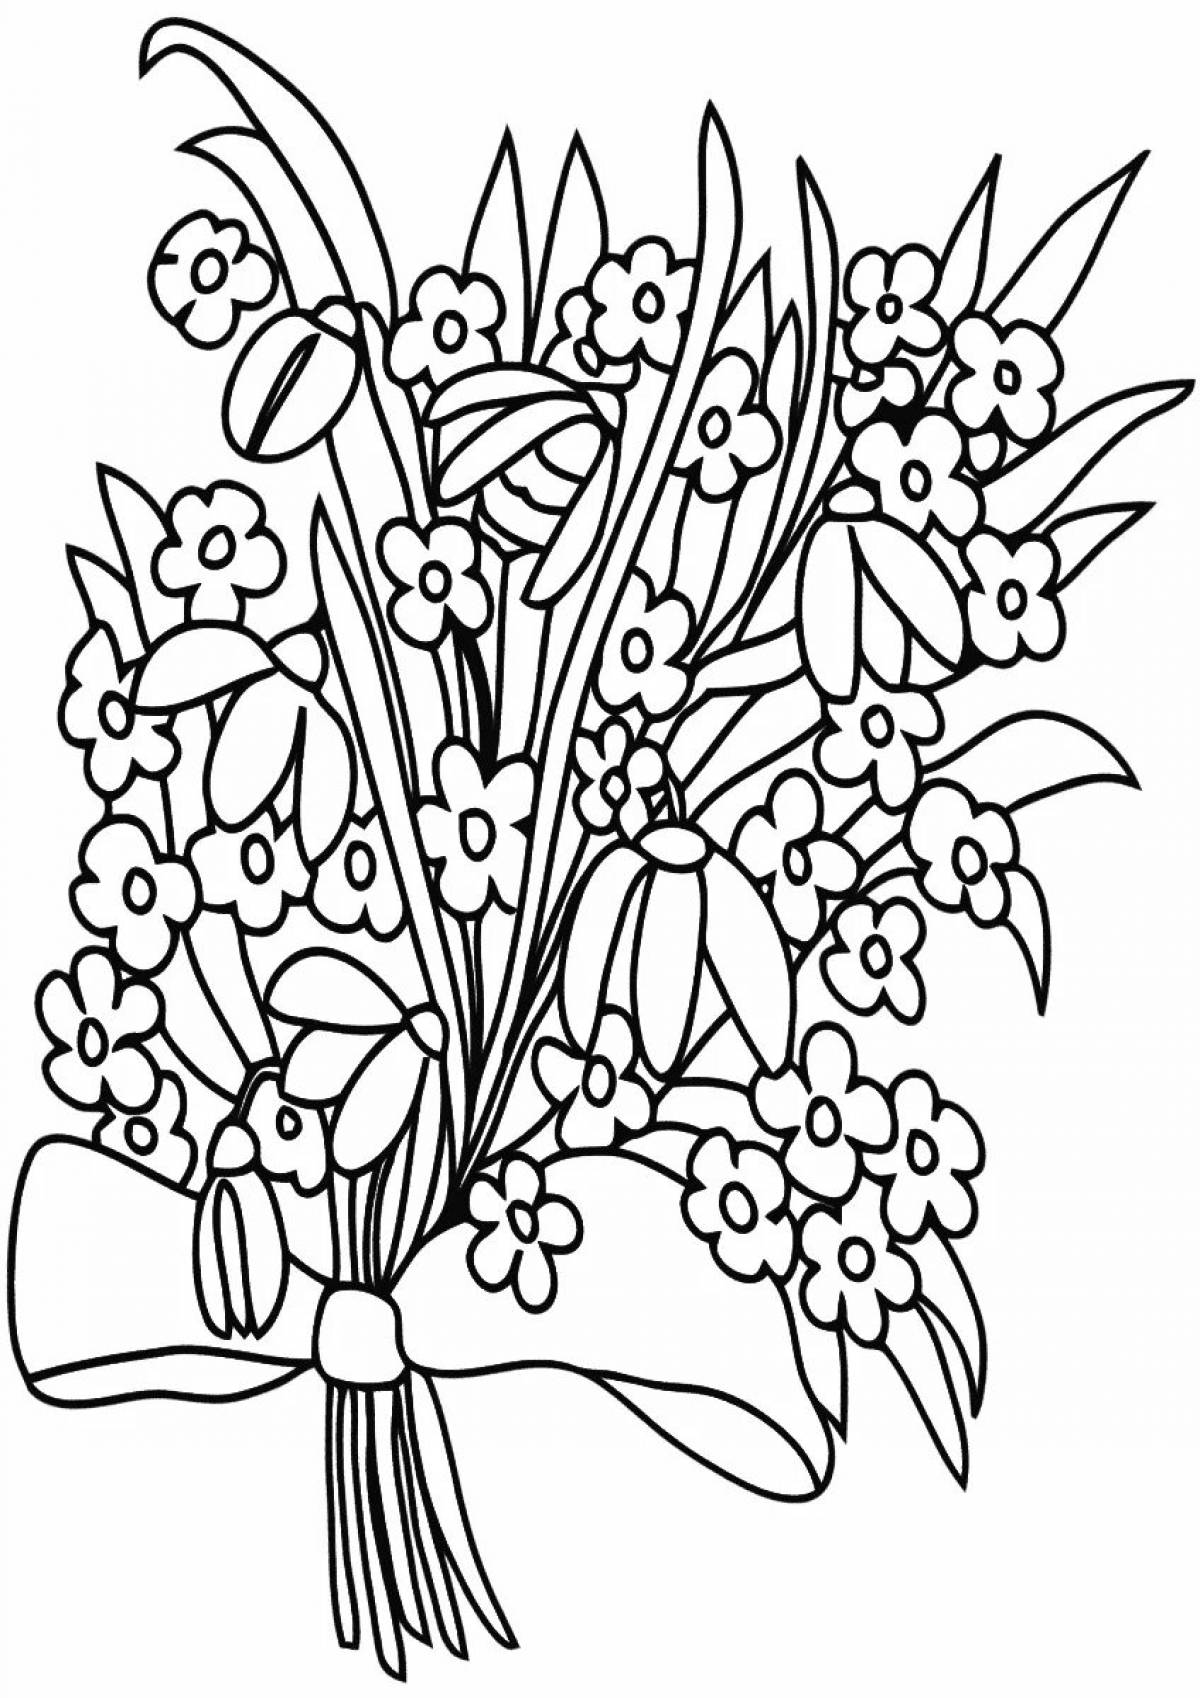 Coloring page wonderful forget-me-not flower